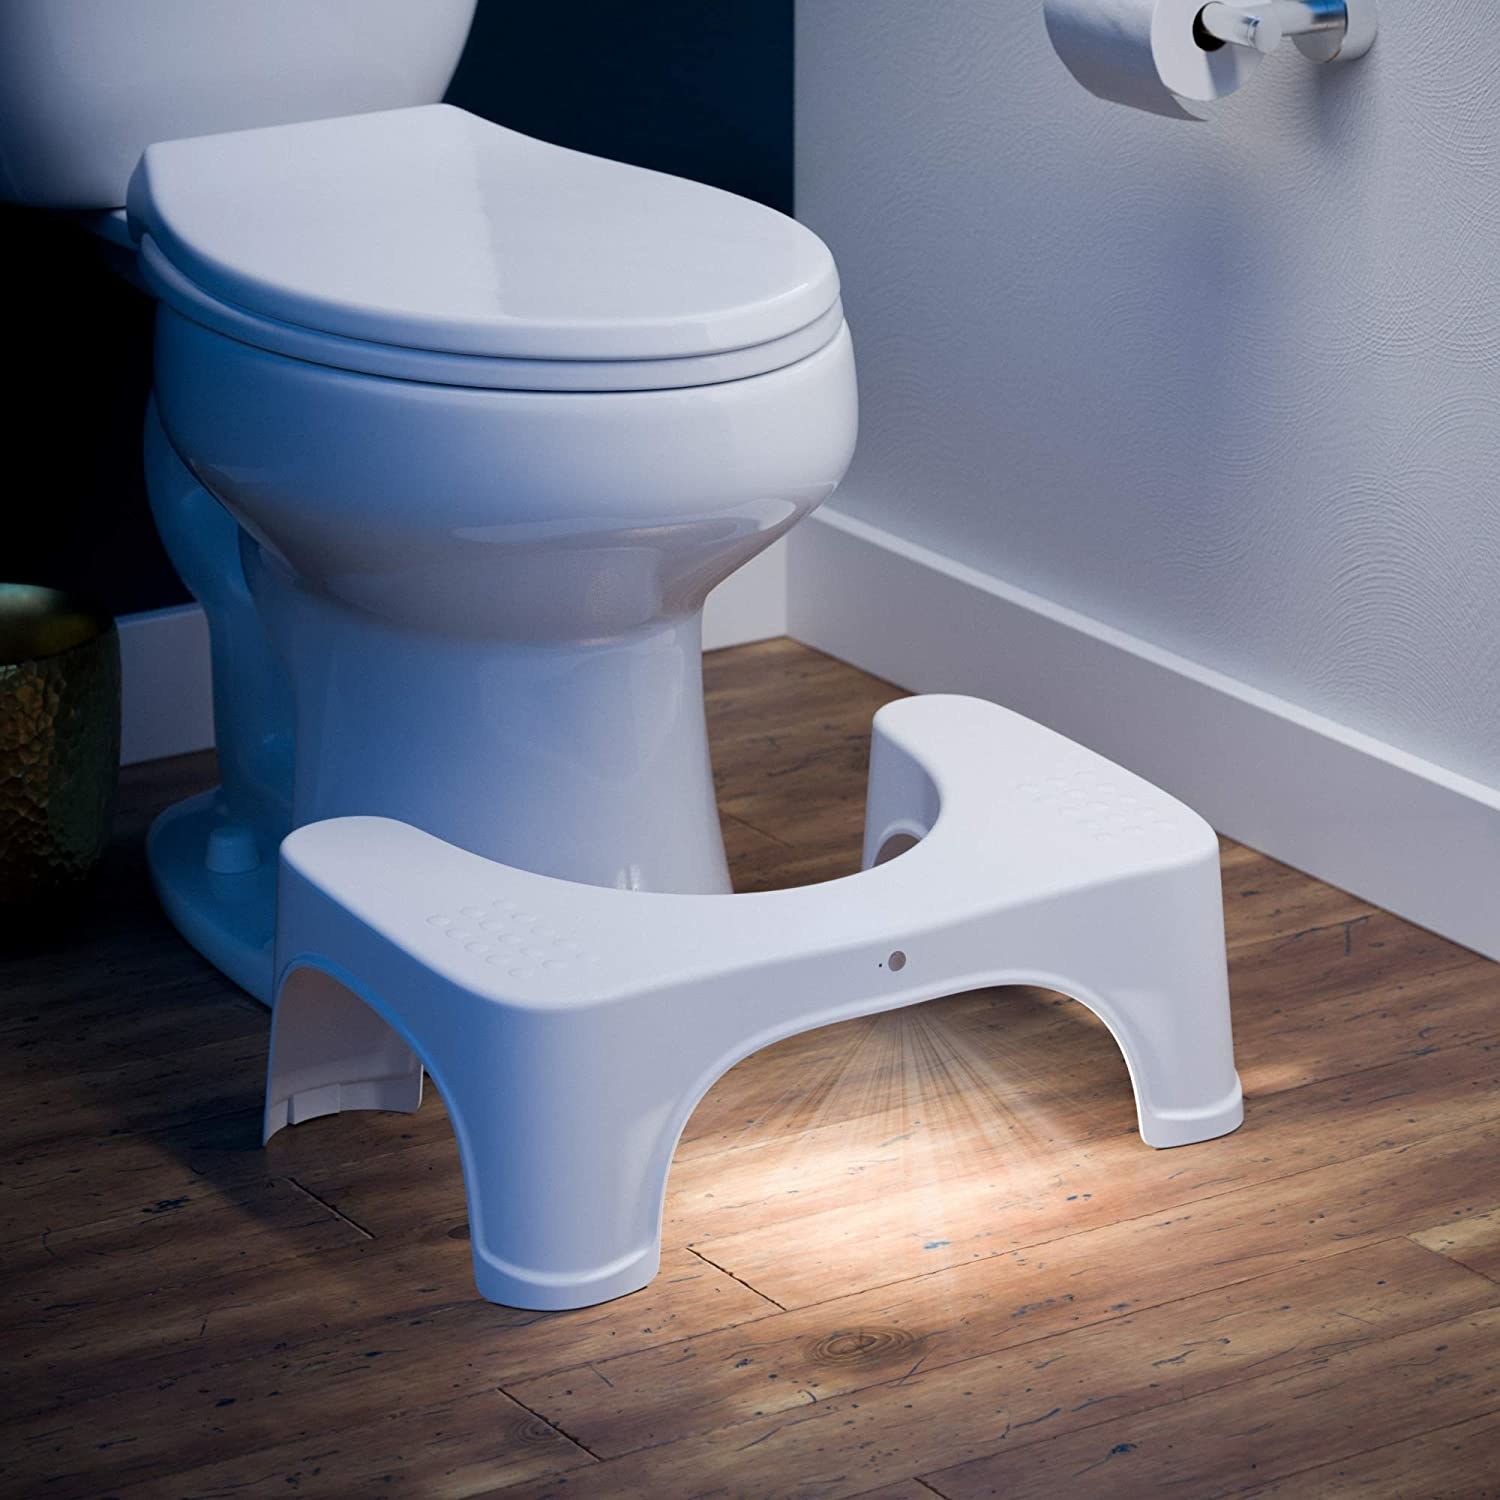 the Squatty Potty with the light on in front of a toilet